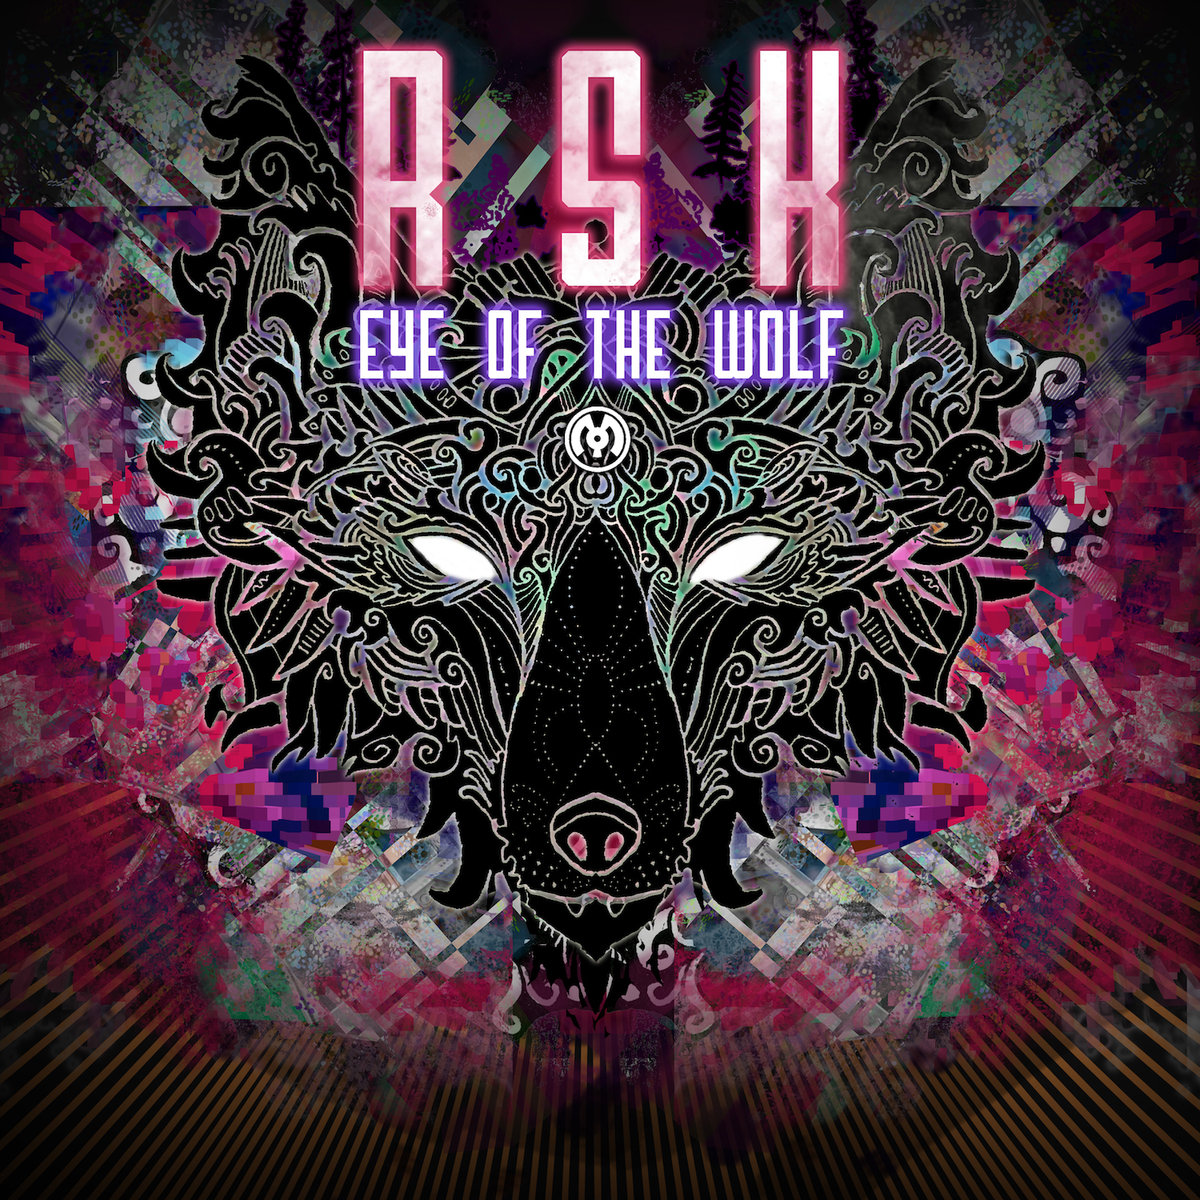 RSK - The Eye of the Wolf